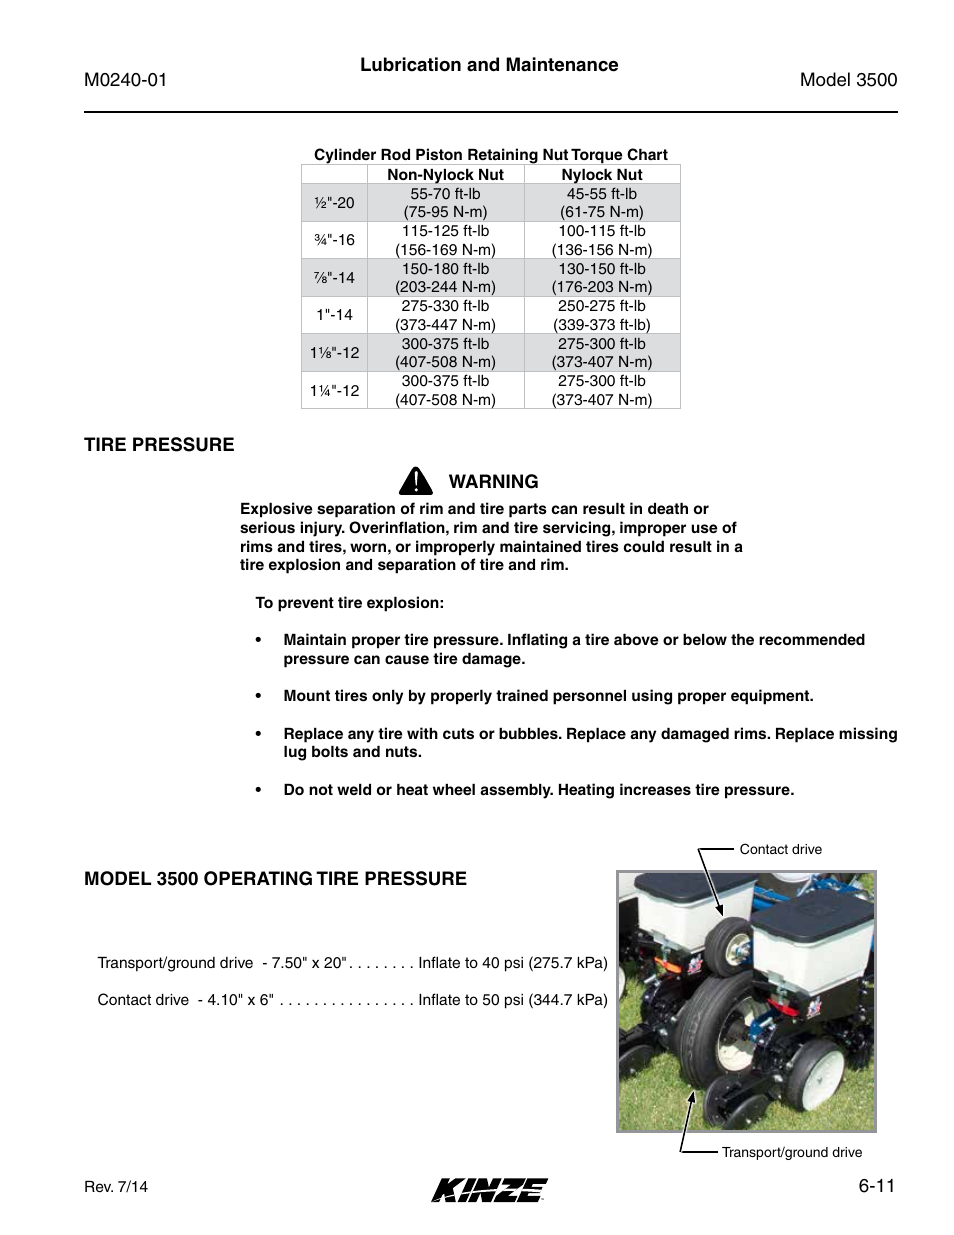 Kinze 3500 Lift and Rotate Planter Rev. 7/14 User Manual | Page 107 / 140